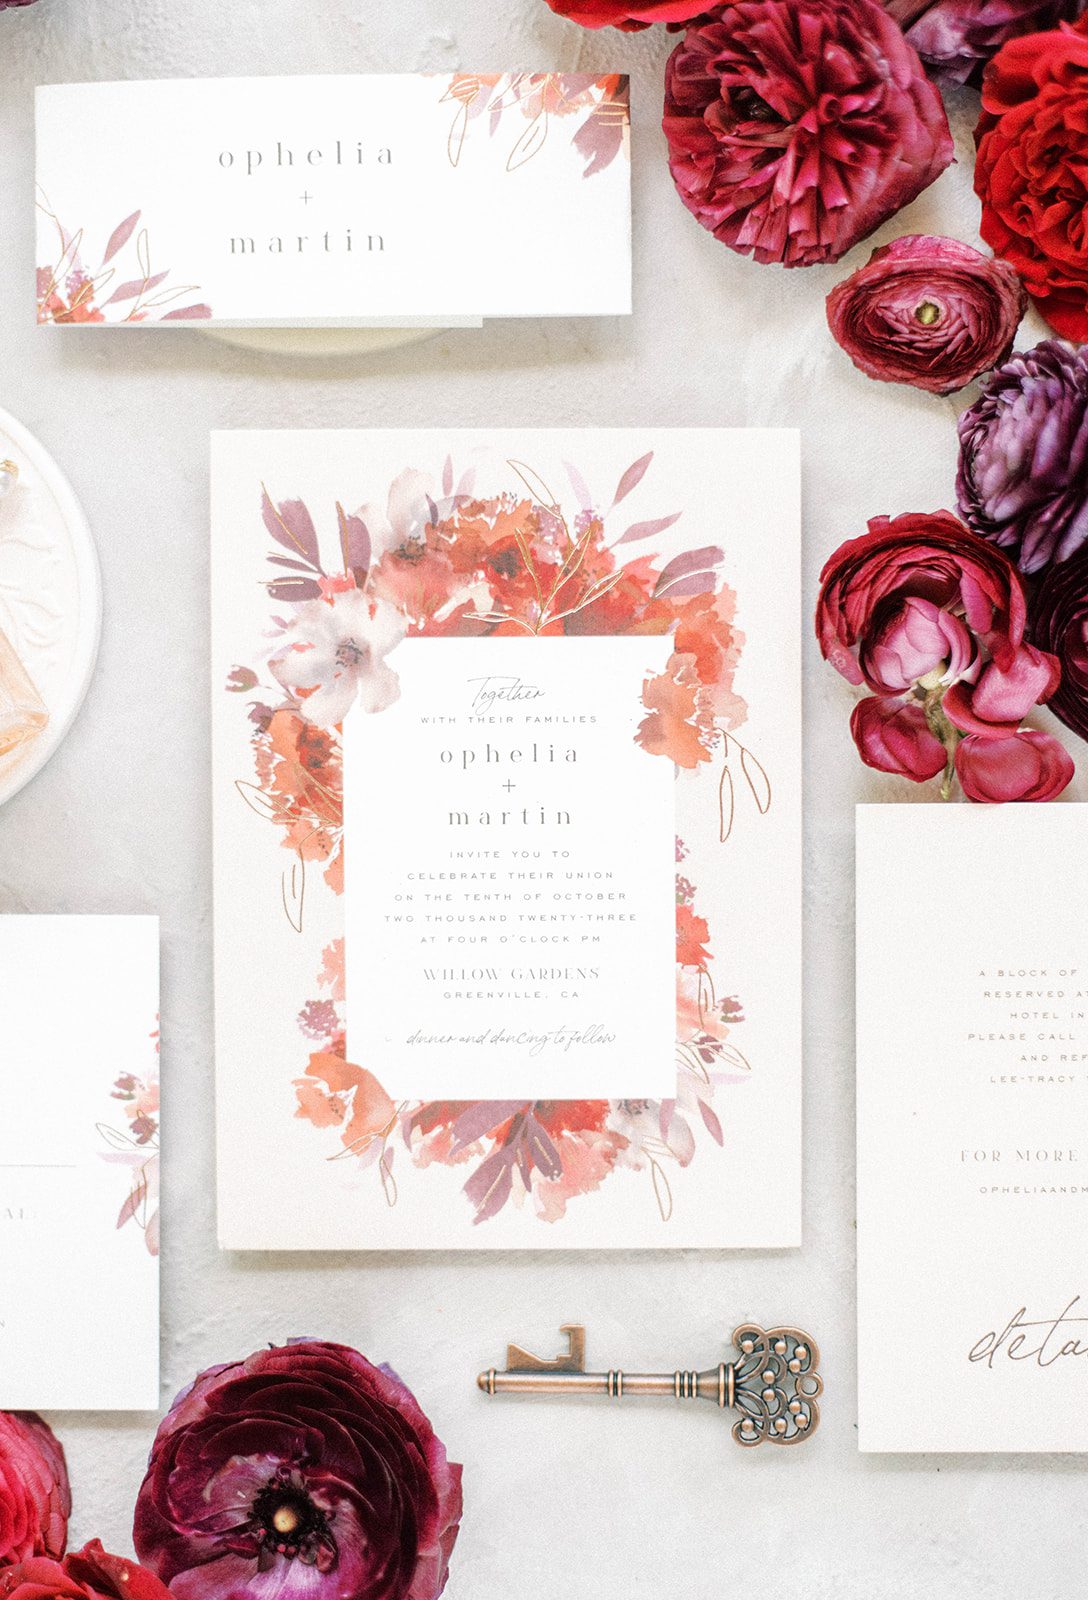 wedding invitation in white and a deep red surrounded by wedding flowers and a key detail